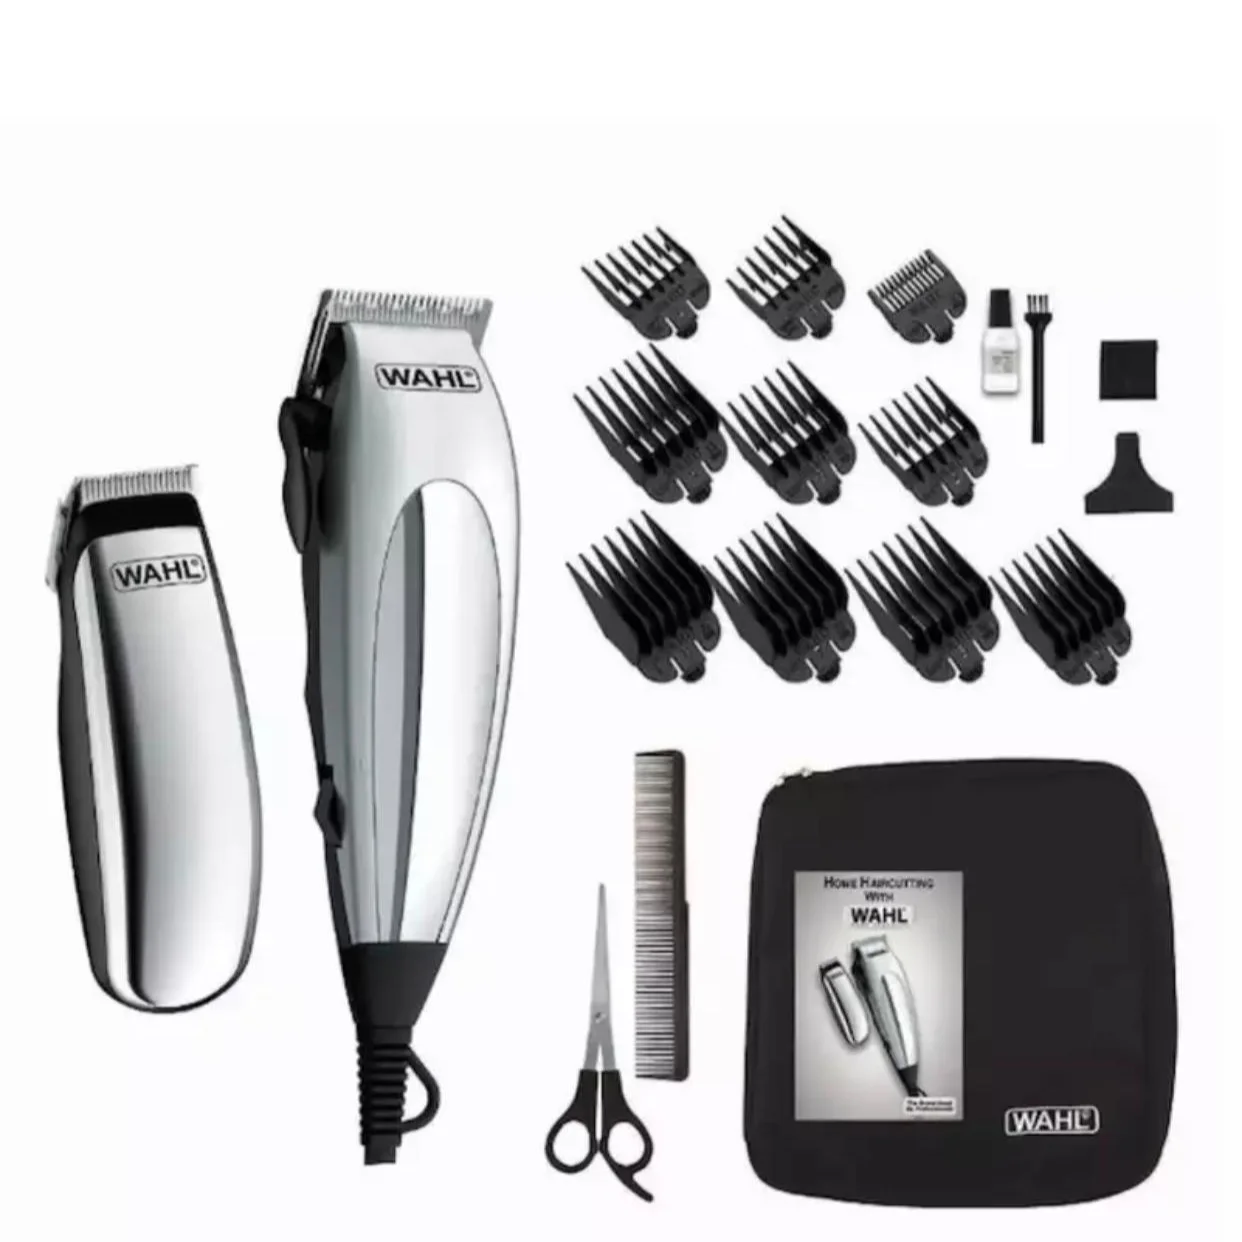 

Original Wahl 79305 Luxury Home Pro Wired Hair Care Hair Clipper Razor Shaver Professional Haircut Shaver Men Hair Trimmer Germa